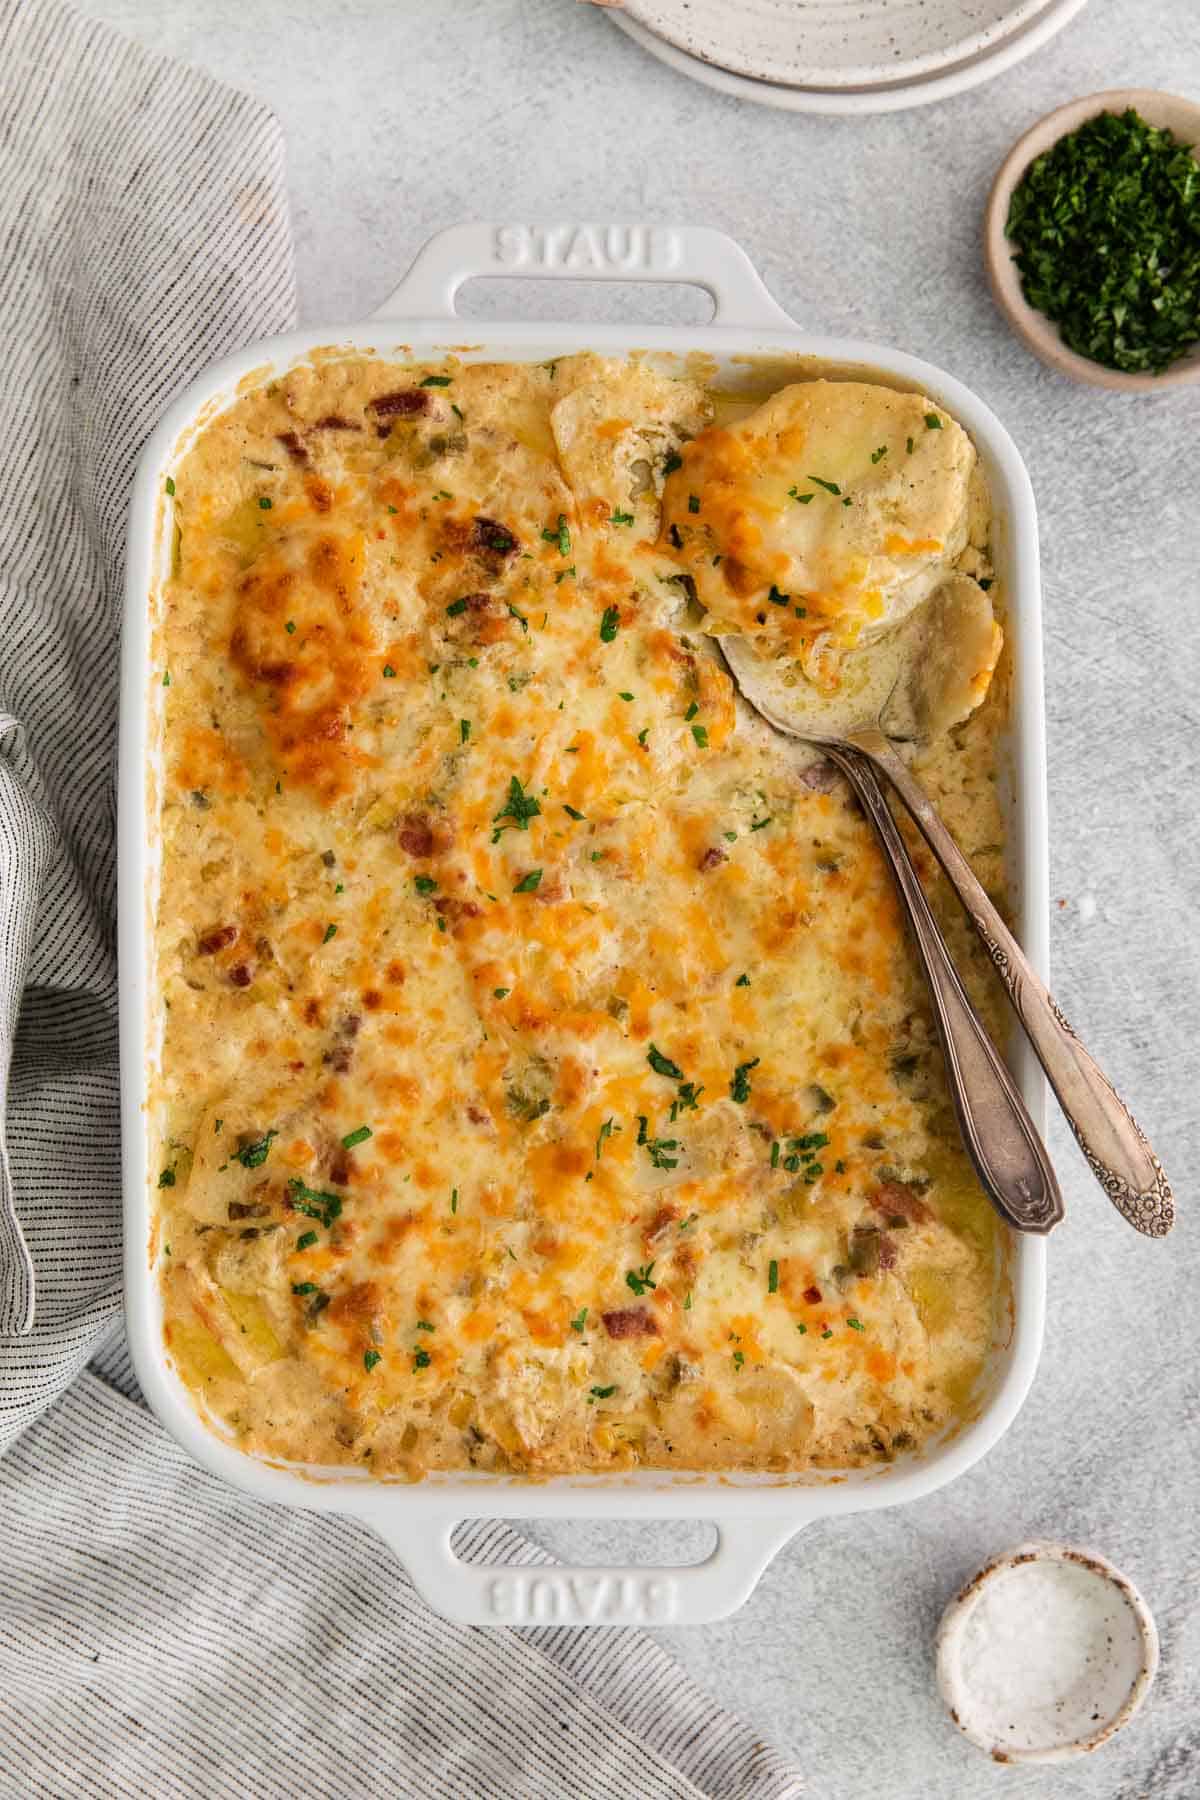 Scalloped potatoes in a baking dish, with a serving spoon scooping a portion from the corner of the dish